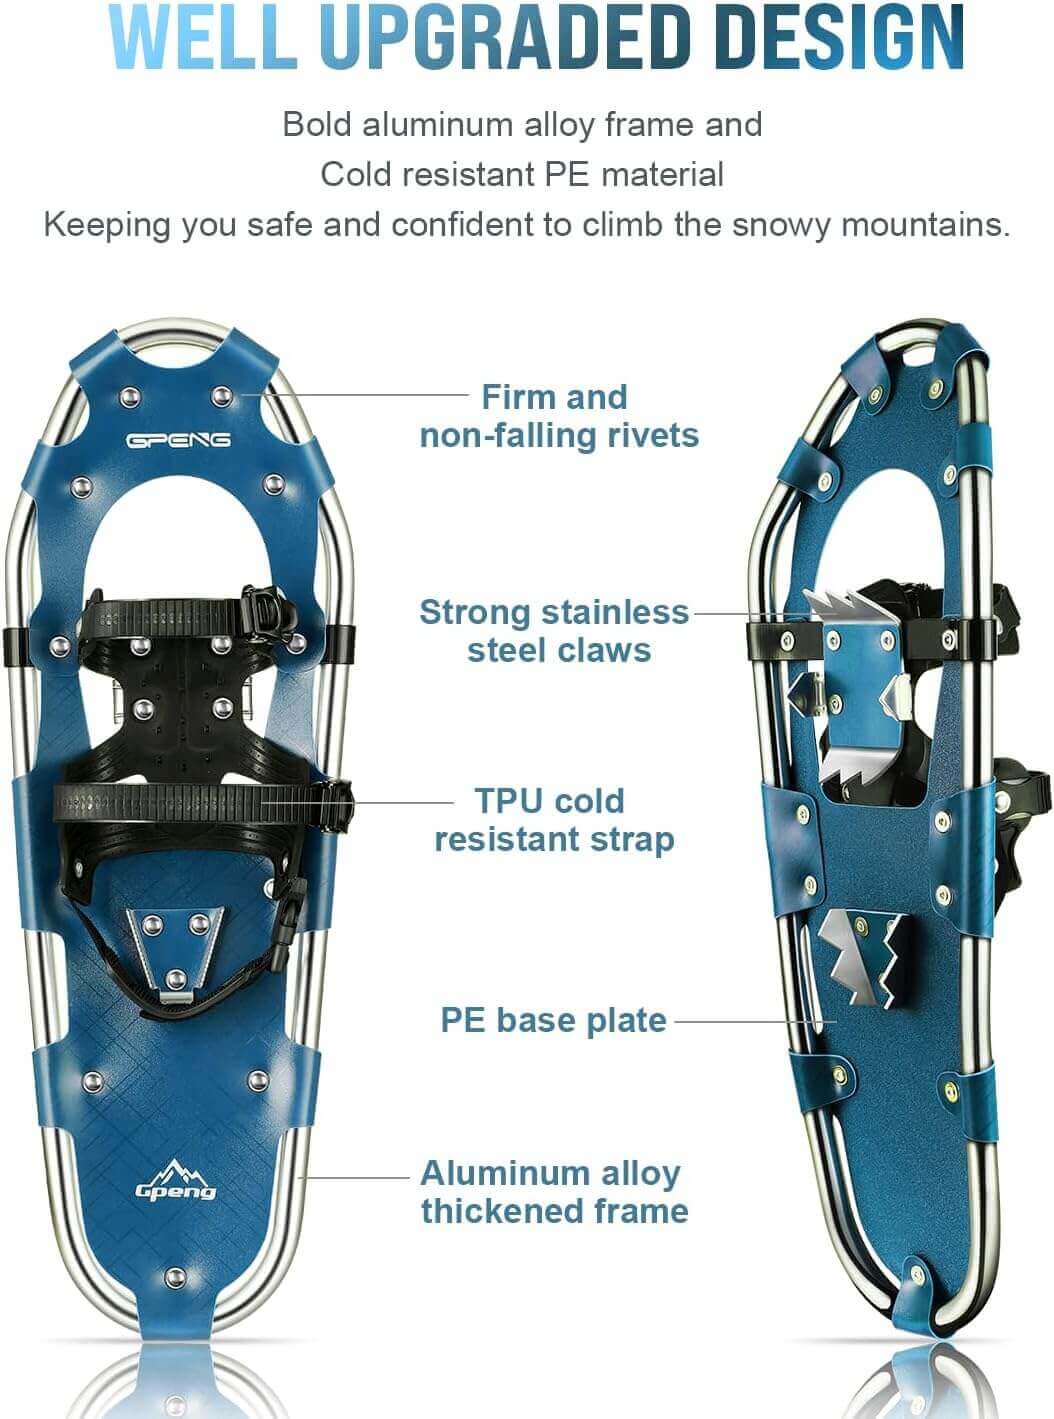 Shop The Latest >3-in-1 Xtreme Lightweight Terrain Snowshoes with Trekking Poles > *Only $107.95*> From The Top Brand > *‎Gpengl* > Shop Now and Get Free Shipping On Orders Over $45.00 >*Shop Earth Foot*